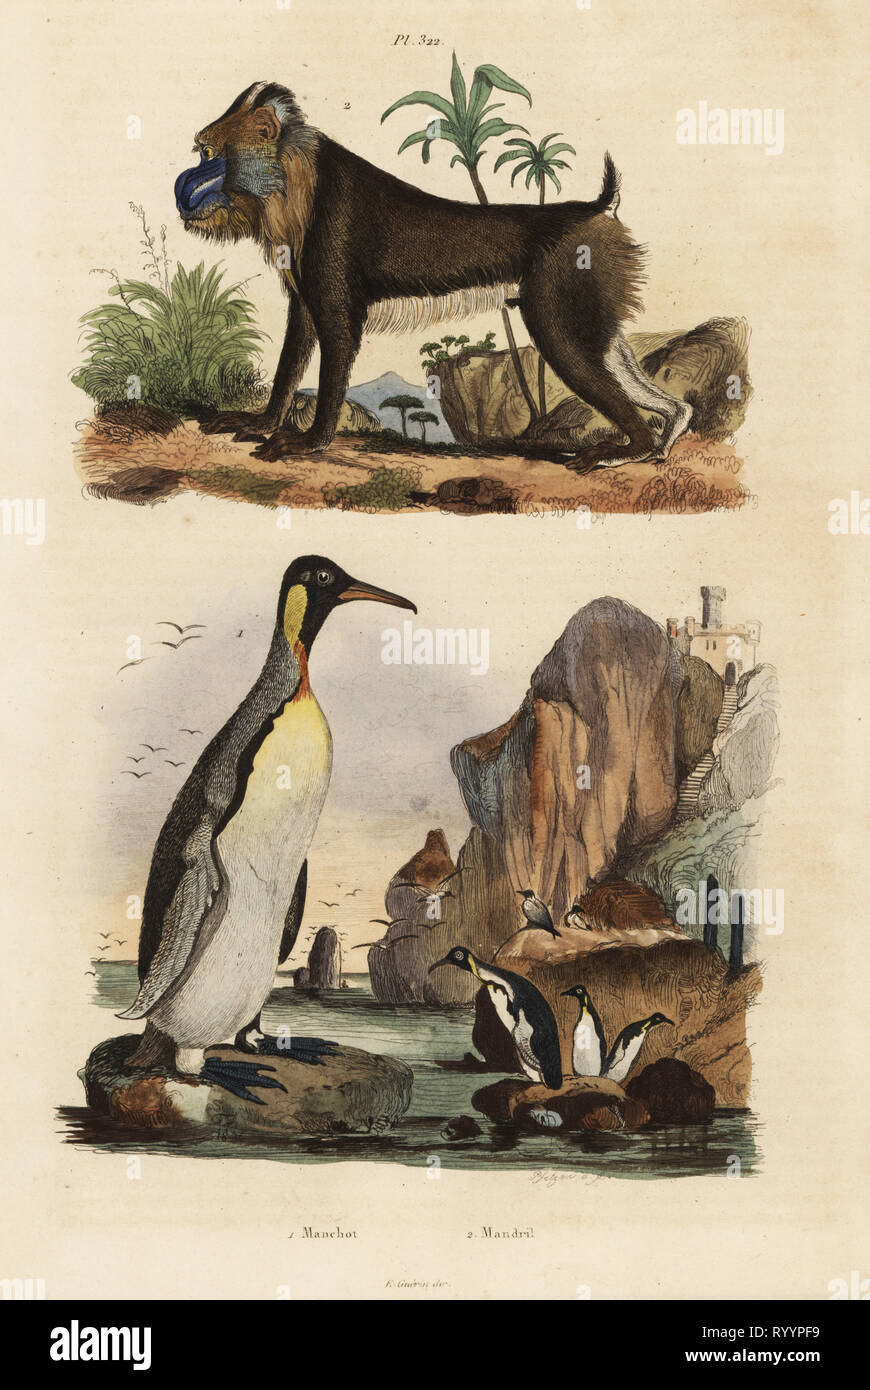 King penguin, Aptenodytes patagonicus 1, and mandrill, Mandrillus sphinx, vulnerable, 2. Manchot, mandril. Handcoloured steel engraving by Pfitzer after an illustration by Adolph Fries from Felix-Edouard Guerin-Meneville's Dictionnaire Pittoresque d'Histoire  Naturelle (Picturesque Dictionary of Natural History), Paris, 1834-39. Stock Photo